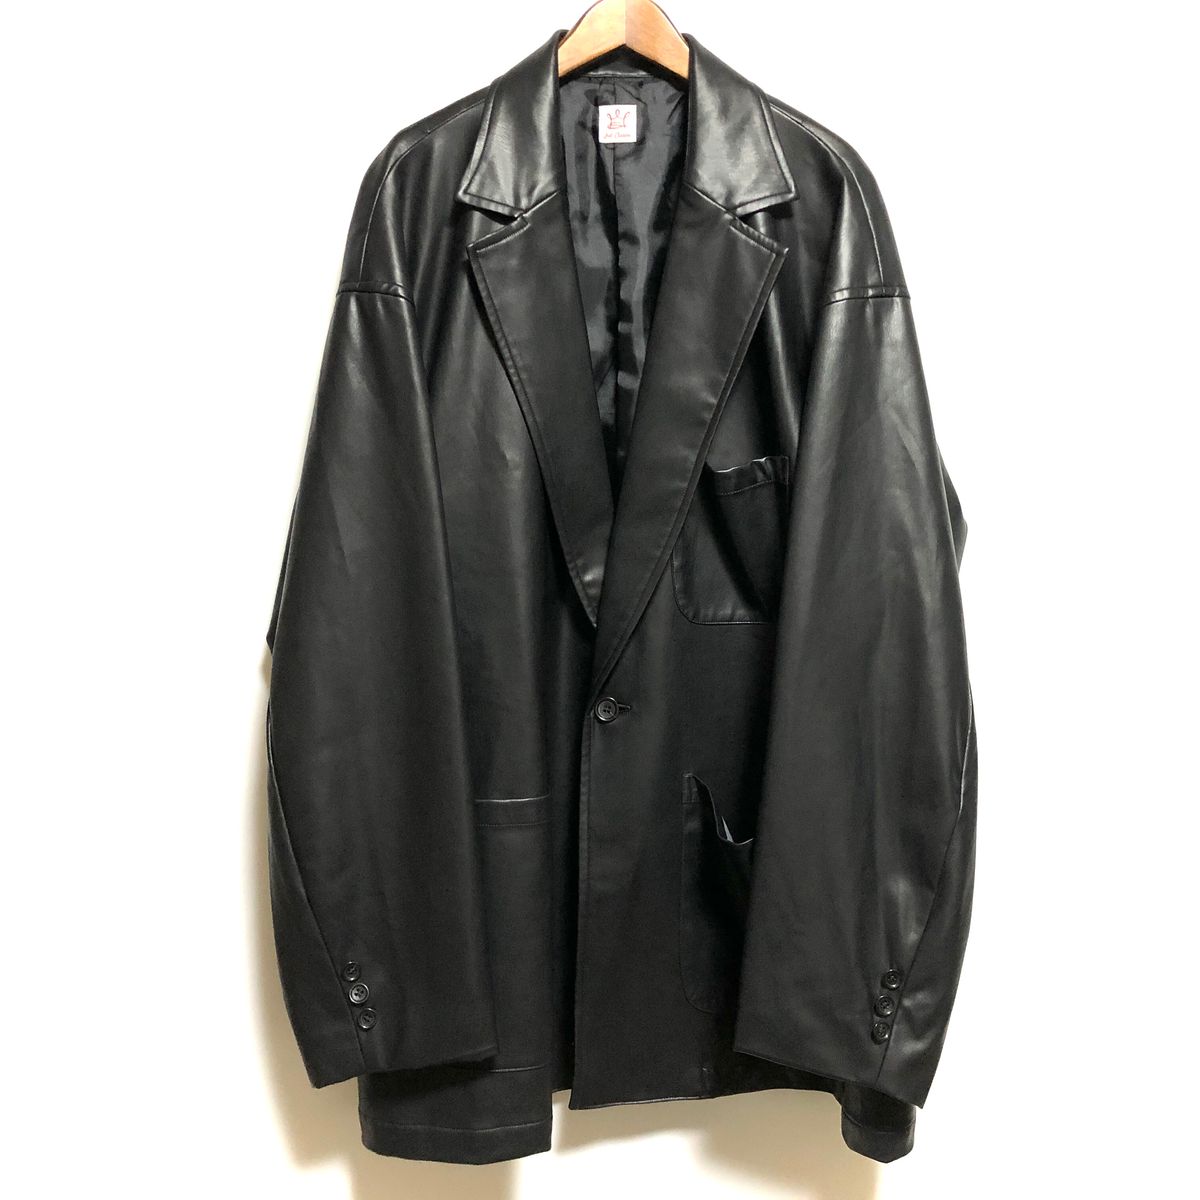 FAT CLASSIC 21AW Faux Leather Relax Jacket エフエイティー クラシック